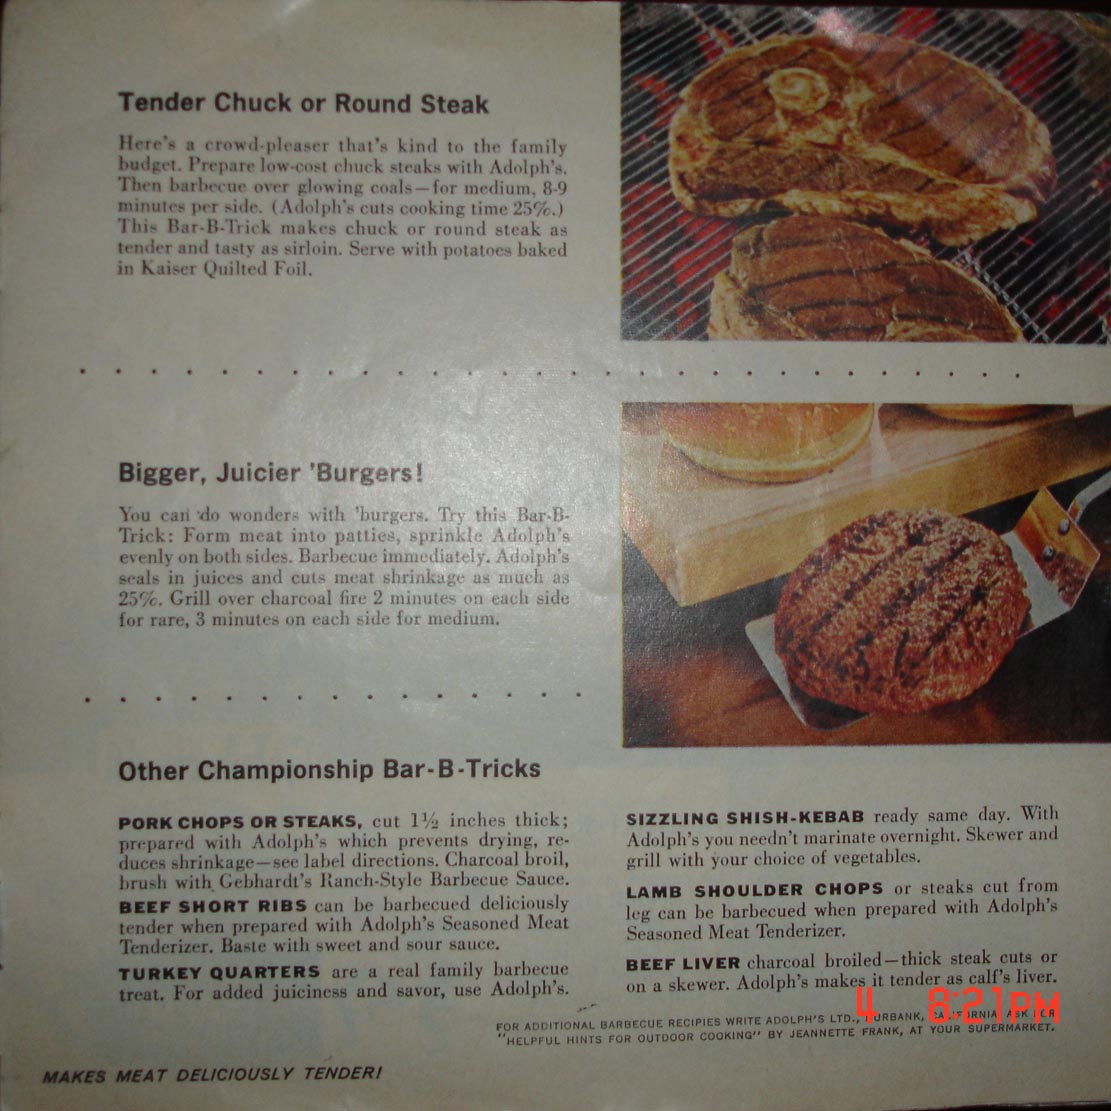 an advertit from the menu of a hamburger and steaks